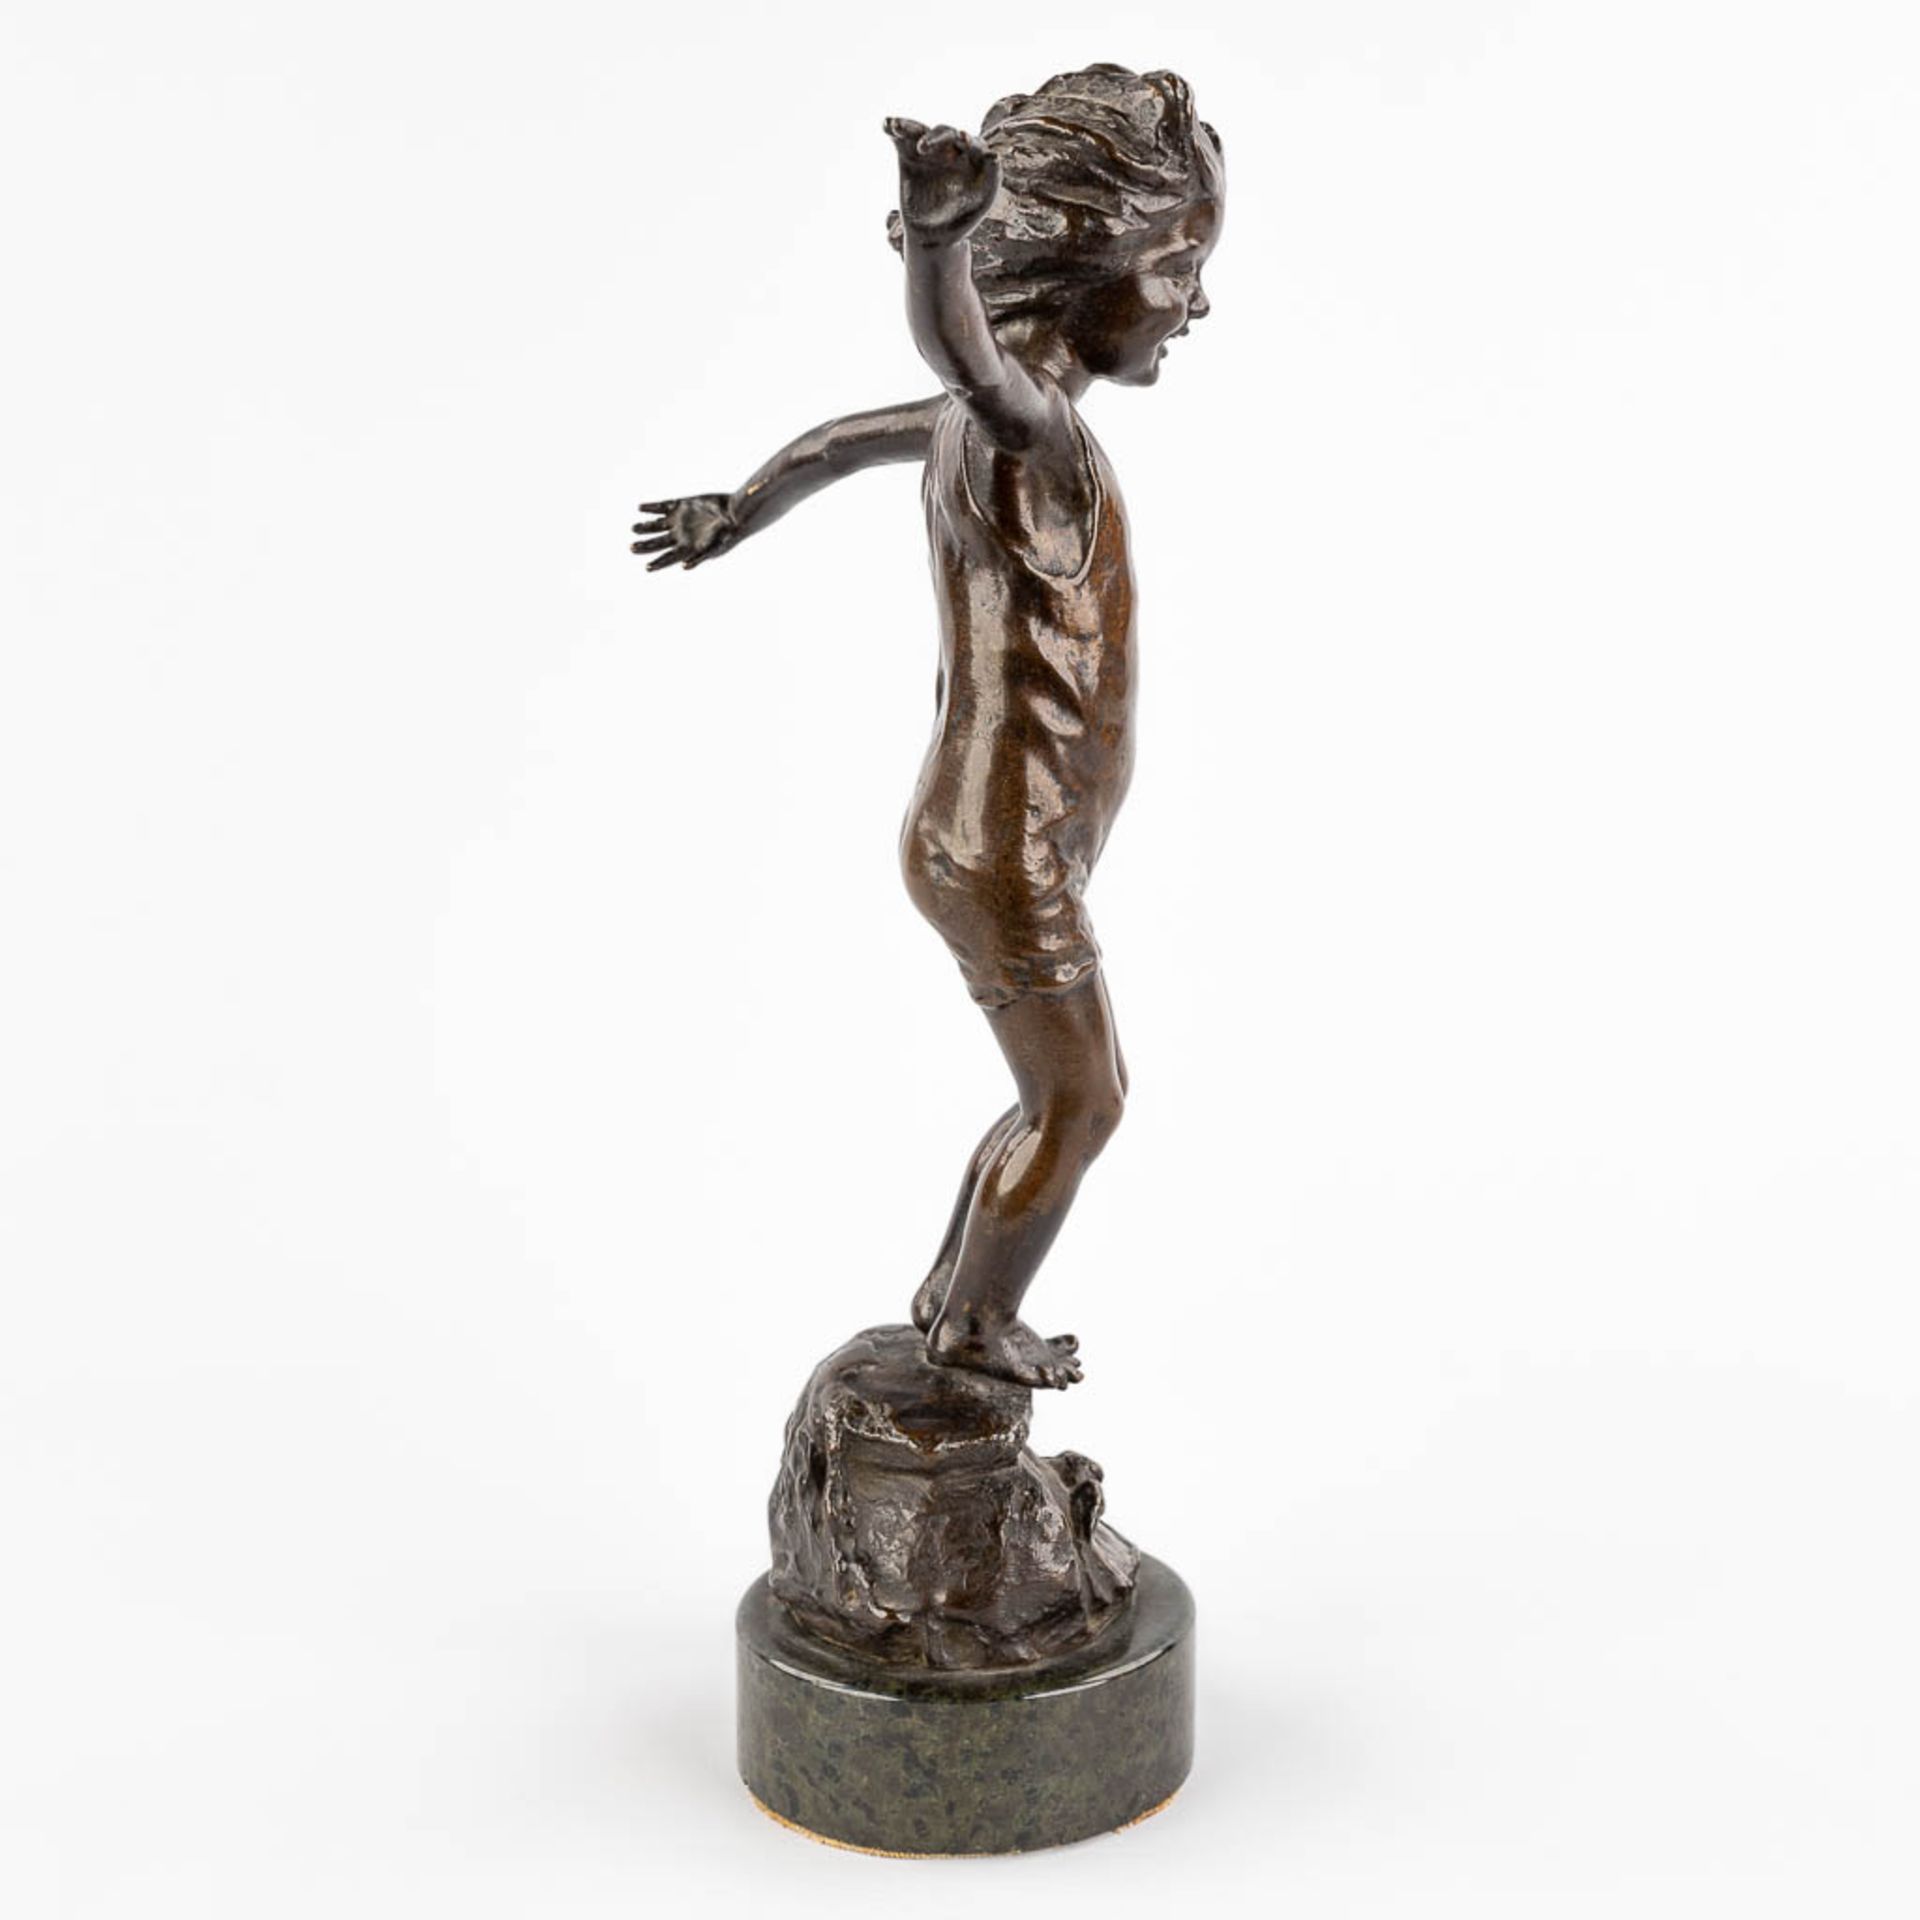 W. FULLER (XIX-XX) 'Baigneuse' patinated bronze on a green marble stand. (W: 17 x H: 29,5 cm) - Image 4 of 11